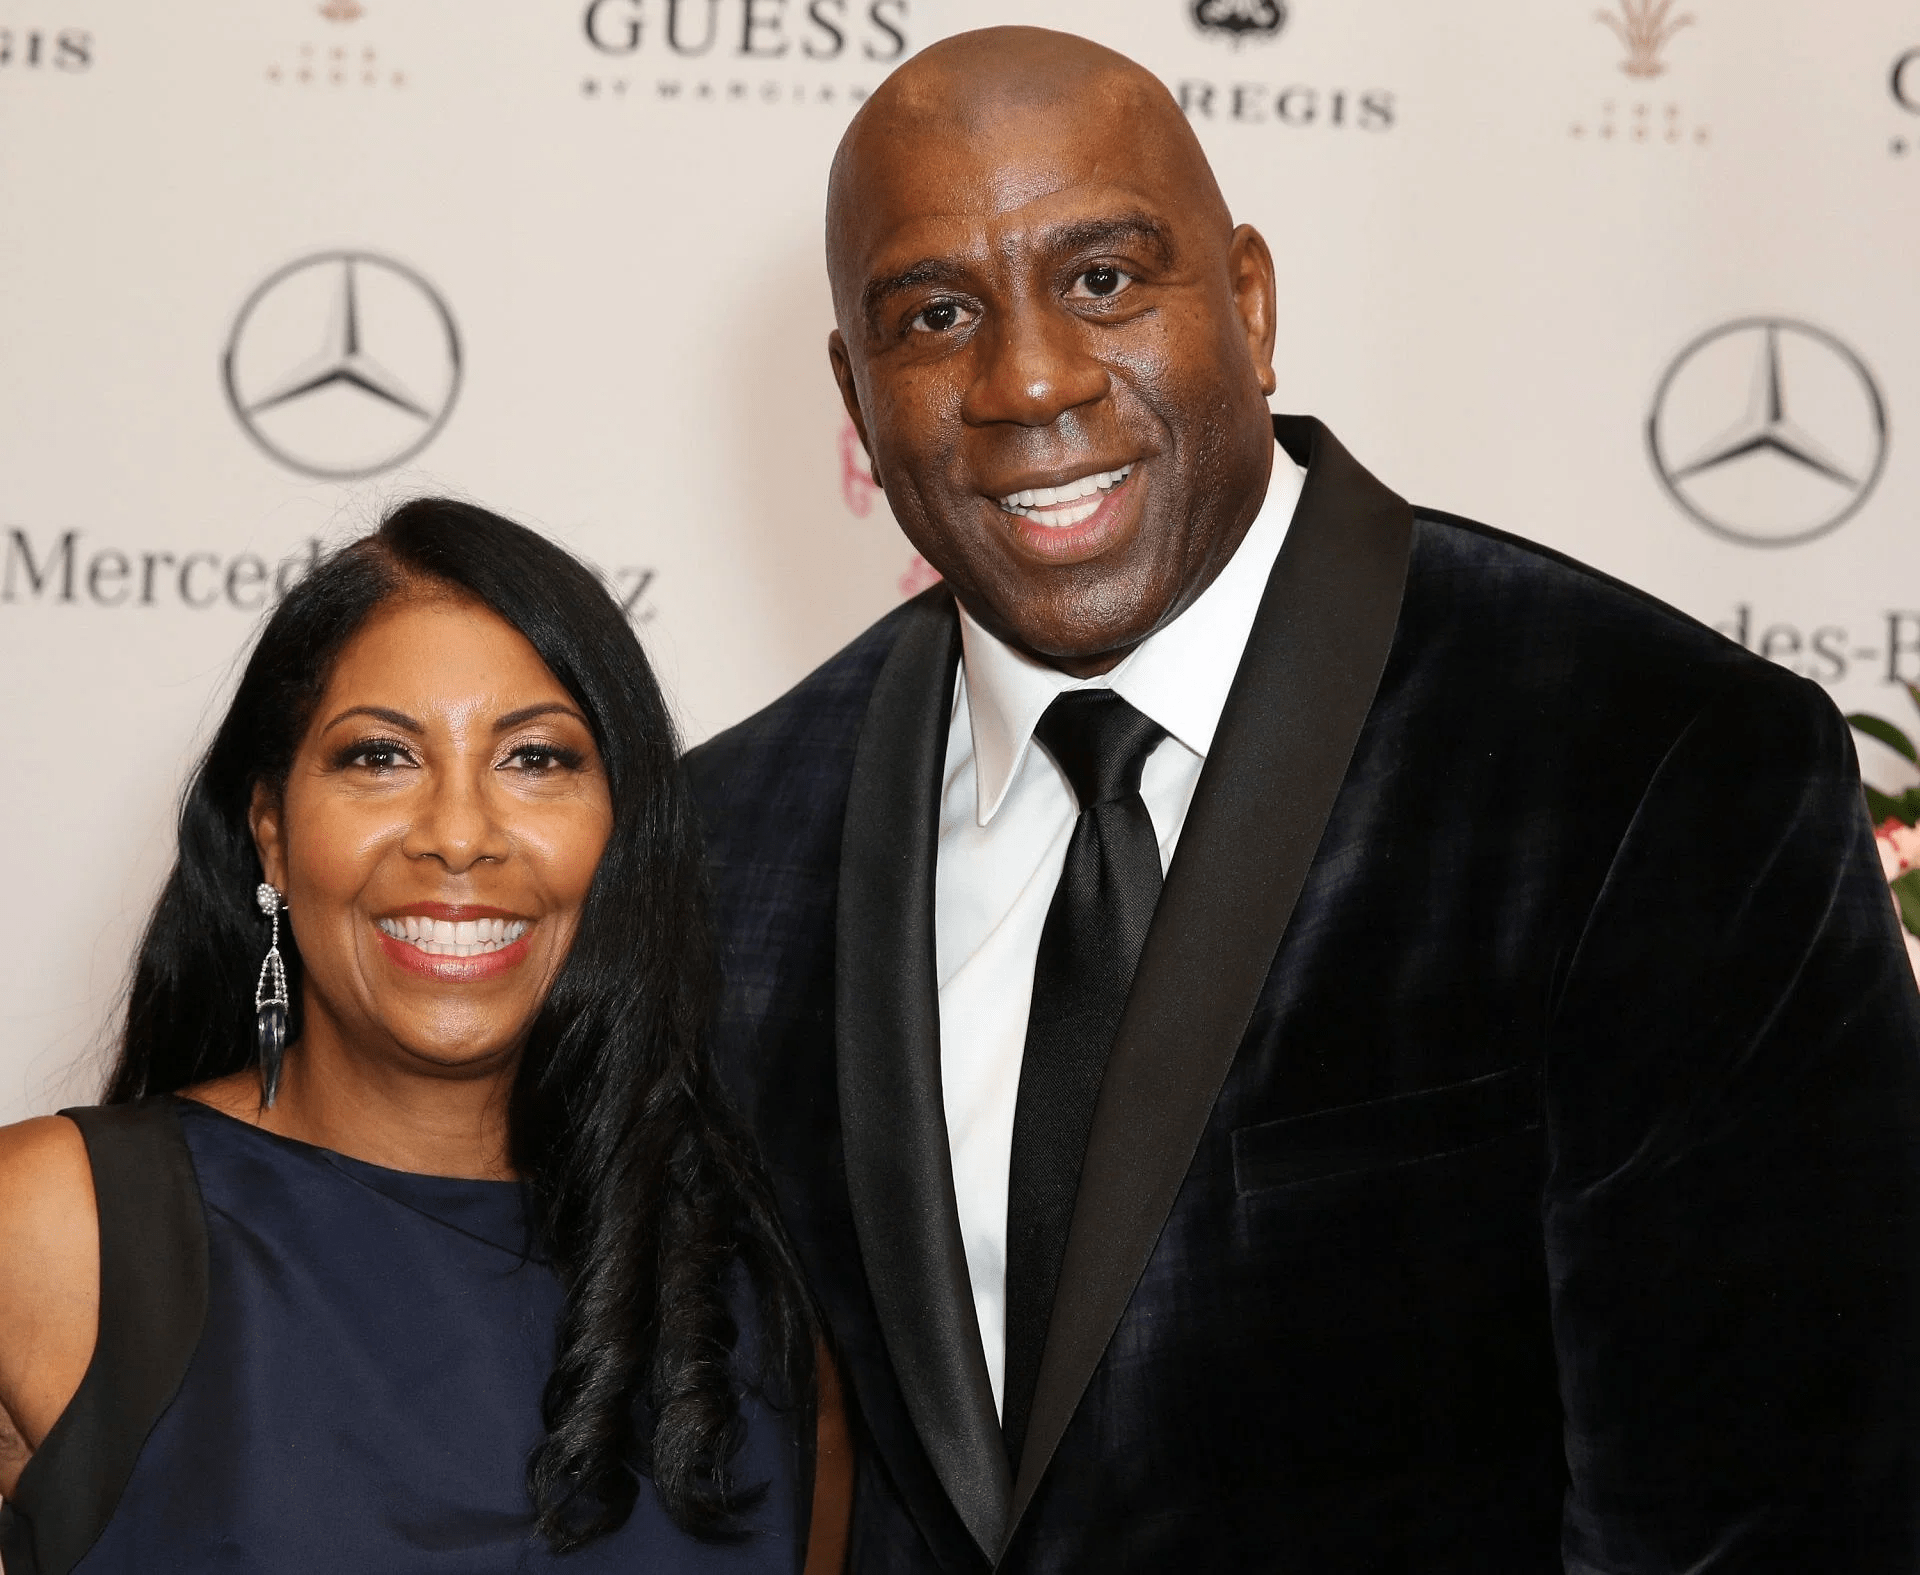 Magic and Cookie Johnson to Continue On Elizabeth Taylor’s Legacy As HIV/AIDS Activists: ‘This Is Where Our Heart Is’